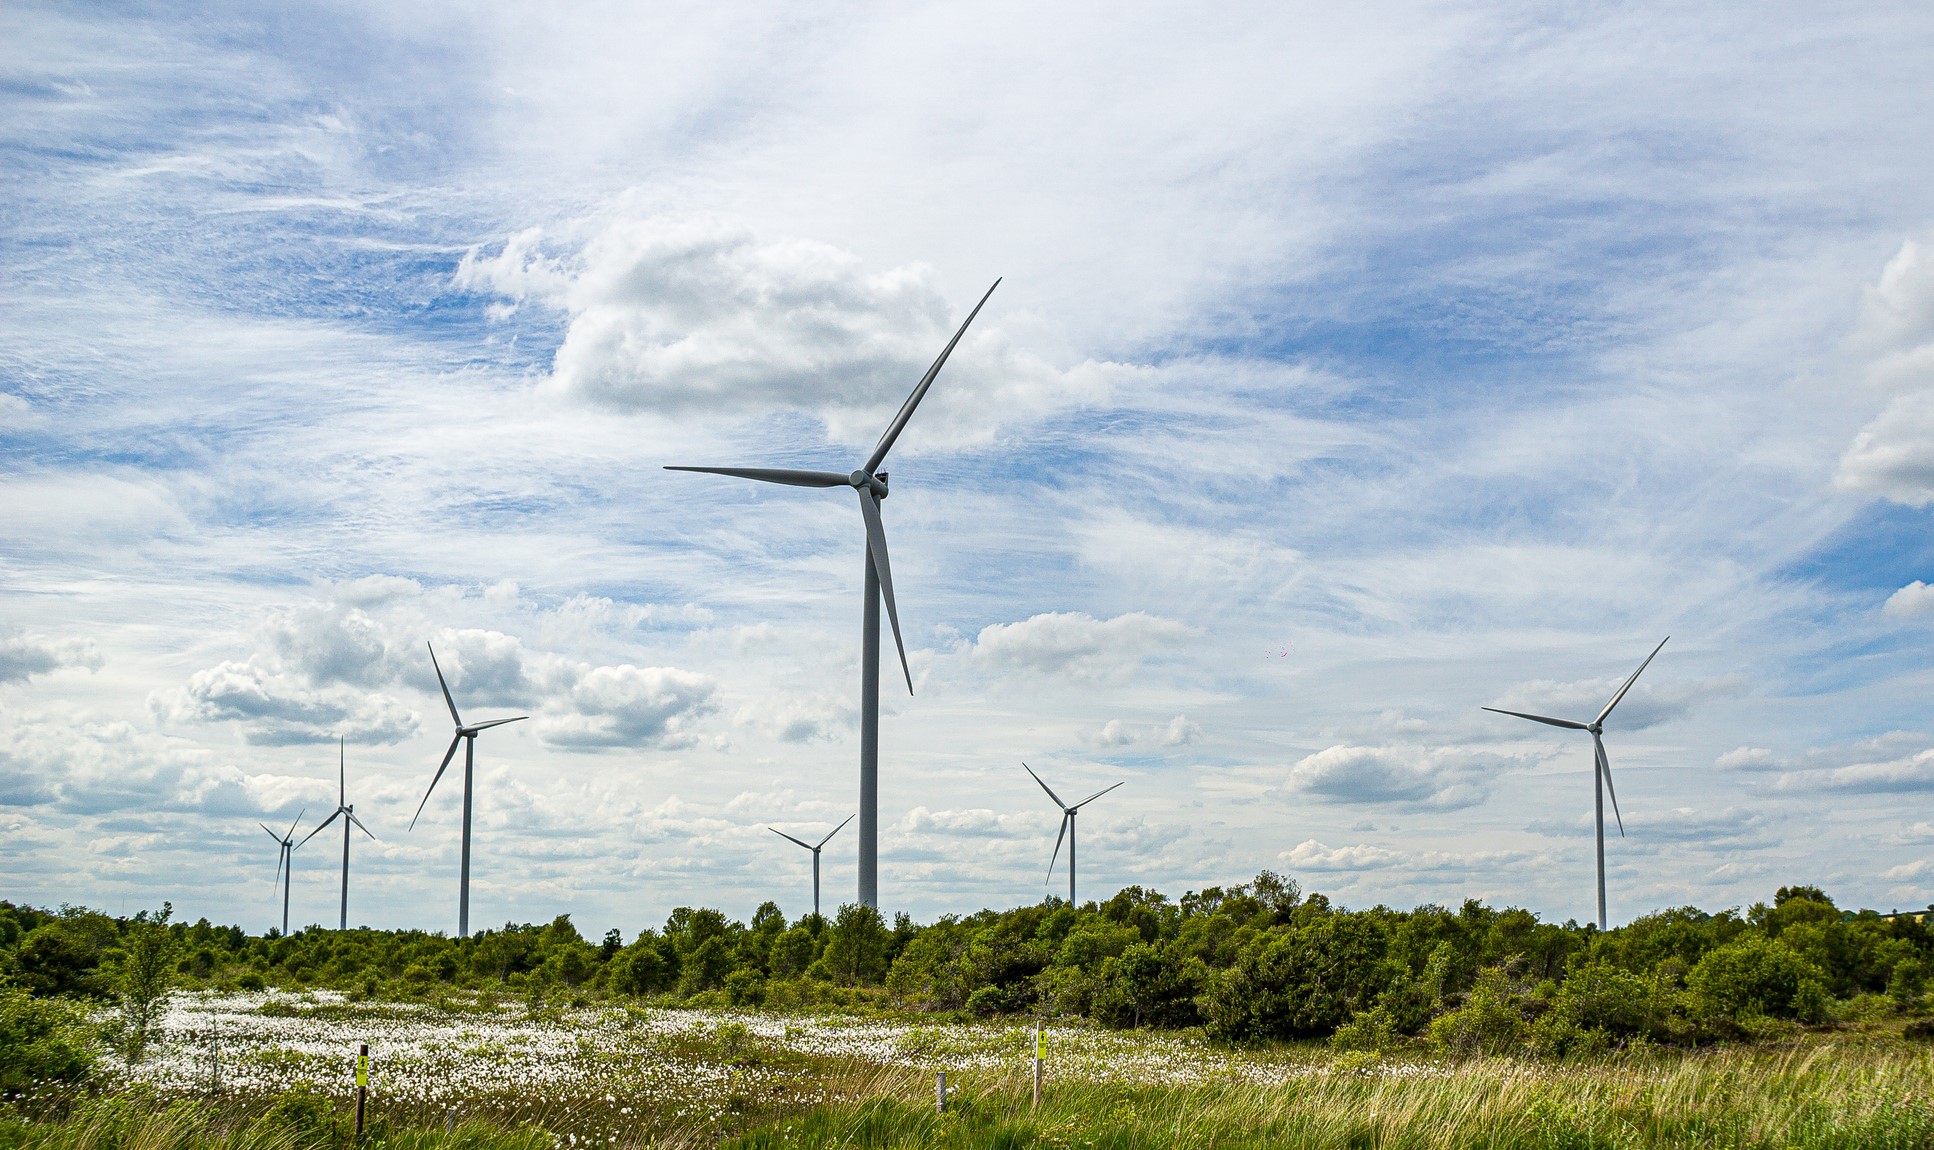 Wind turbines surrounded by flowers and greenery